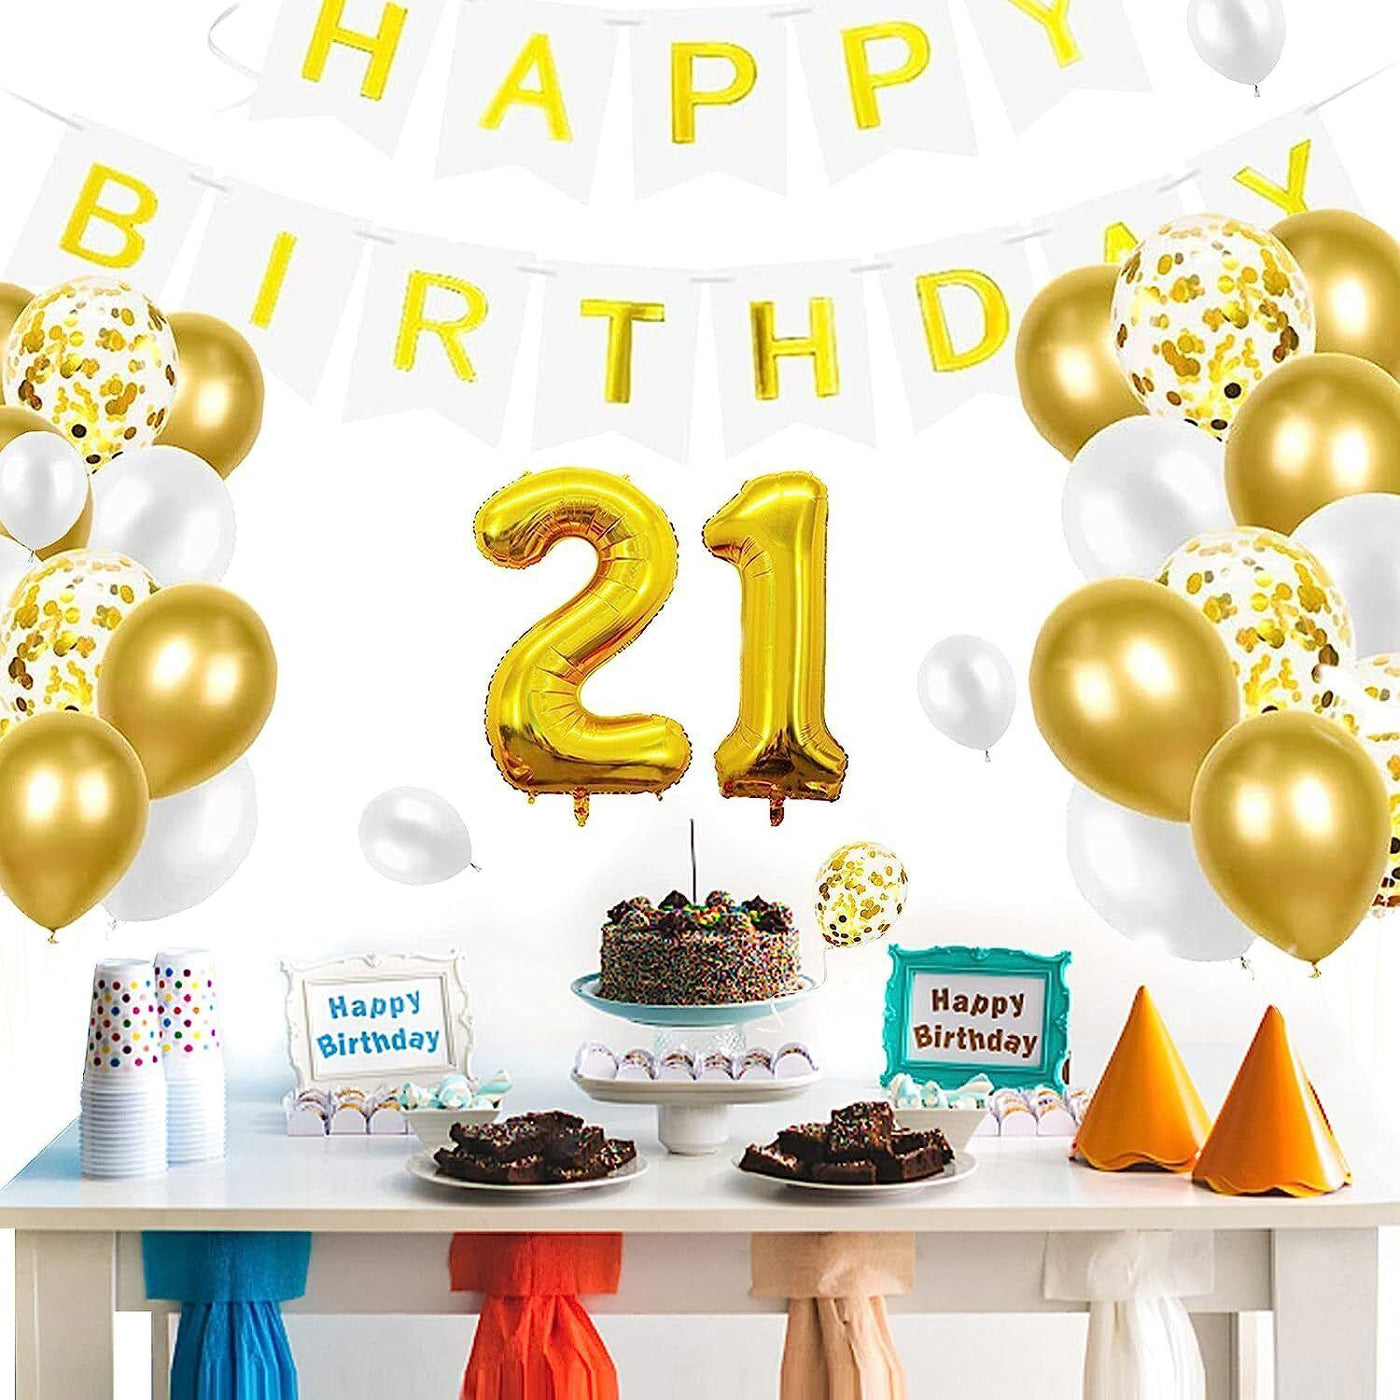 Birthday Decoration Balloon set for 18th, 21st, 30th, 40th, and 50th birthdays - Massive Discounts